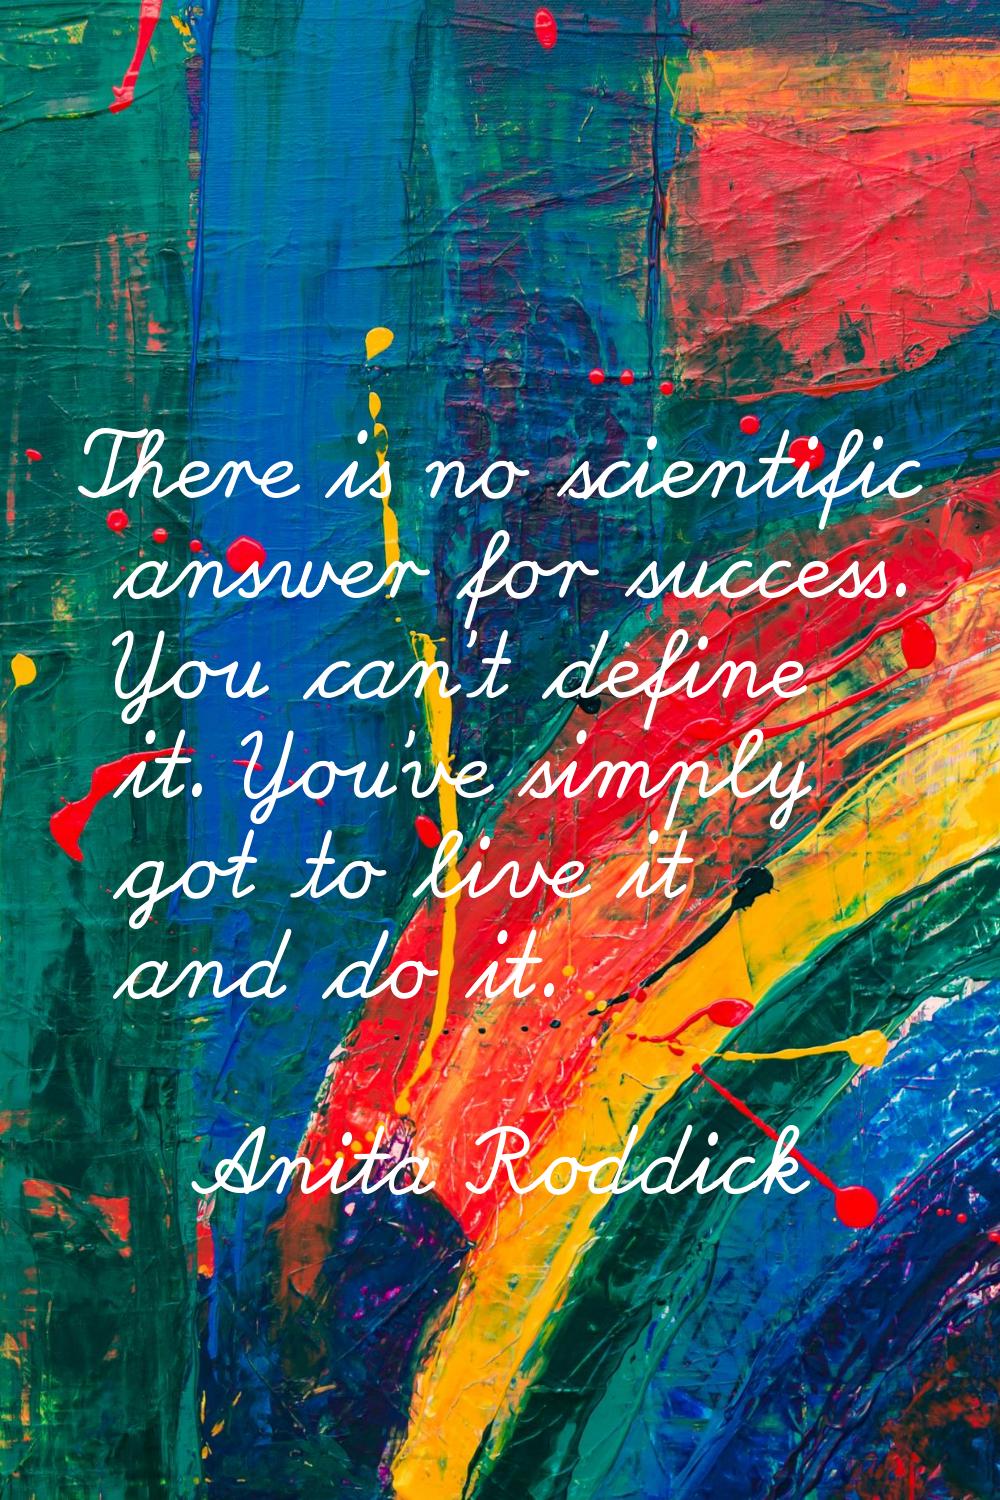 There is no scientific answer for success. You can't define it. You've simply got to live it and do